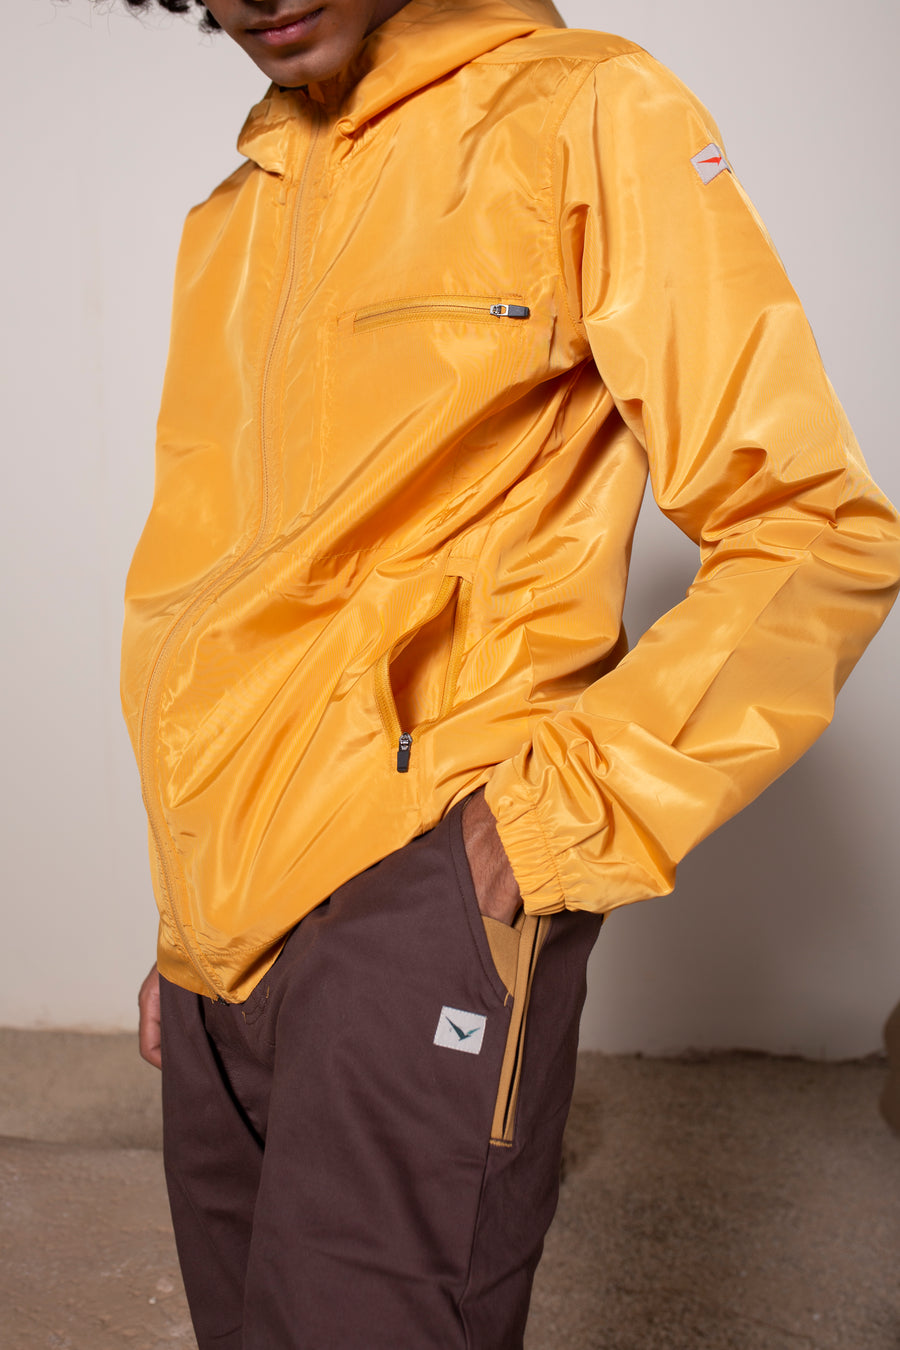 Men's Windansea Jacket in Golden | VOLO Apparel | The ultimate all year jacket, an ultralight hooded windbreaker, crafted with the revolutionary memory fabric and five pockets. This jacket is full of features, water repellant, three zipper pockets, UPF 50 protection from the sun and tailored fit to look super stylish while being ready for any adventure.